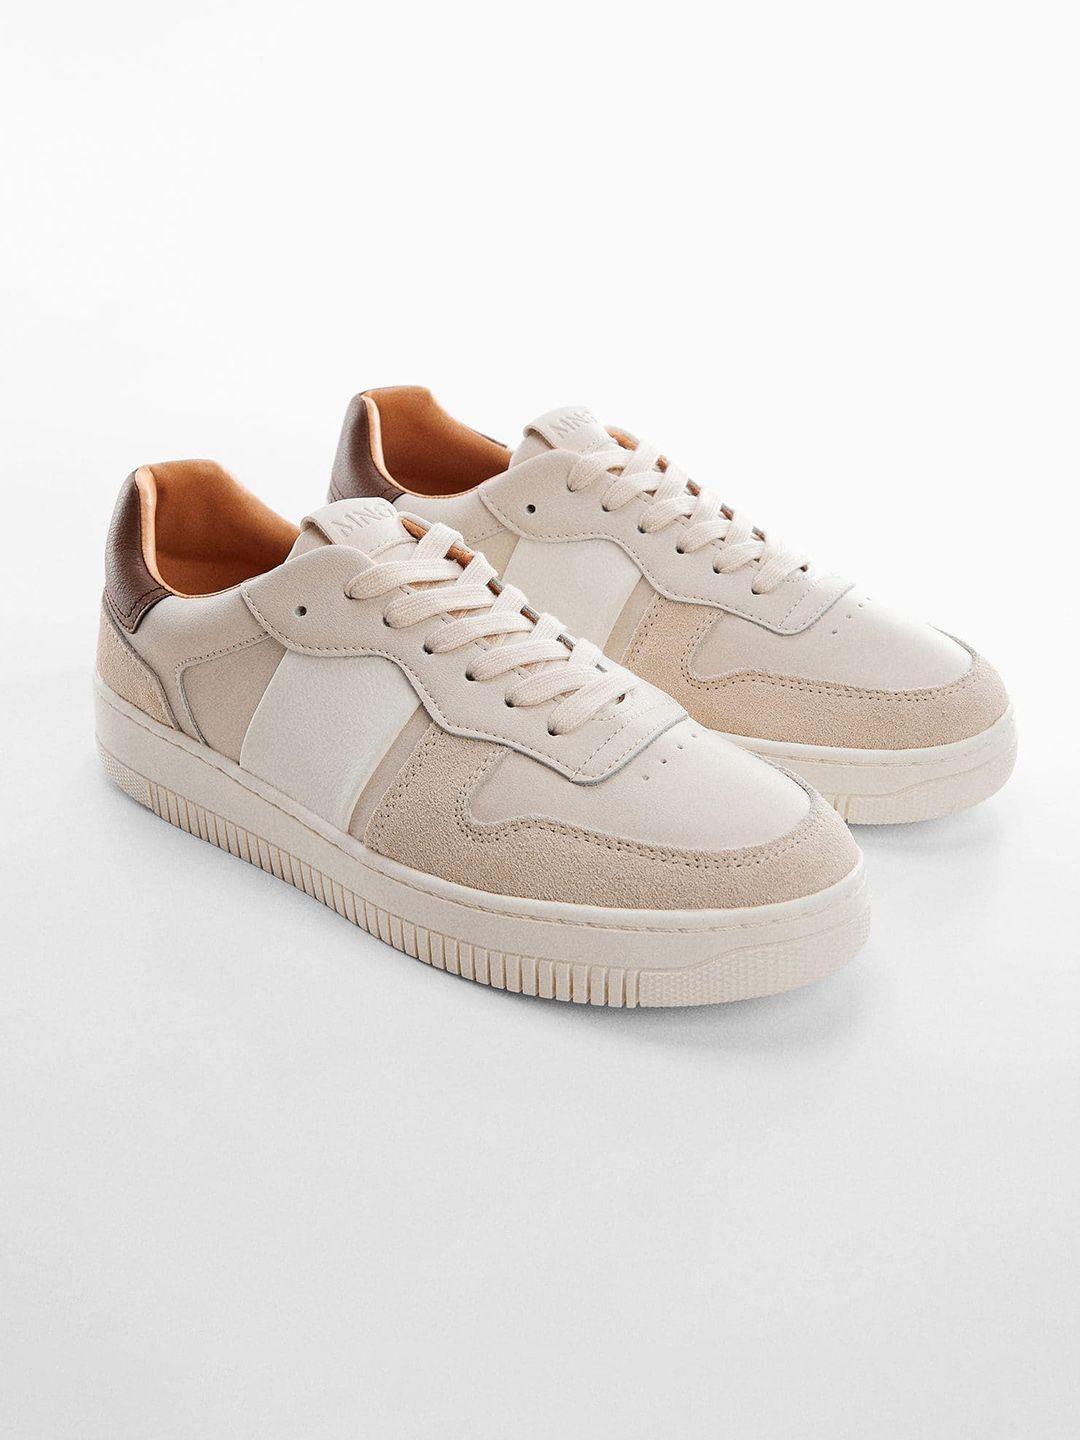 mango man leather sustainable sneakers